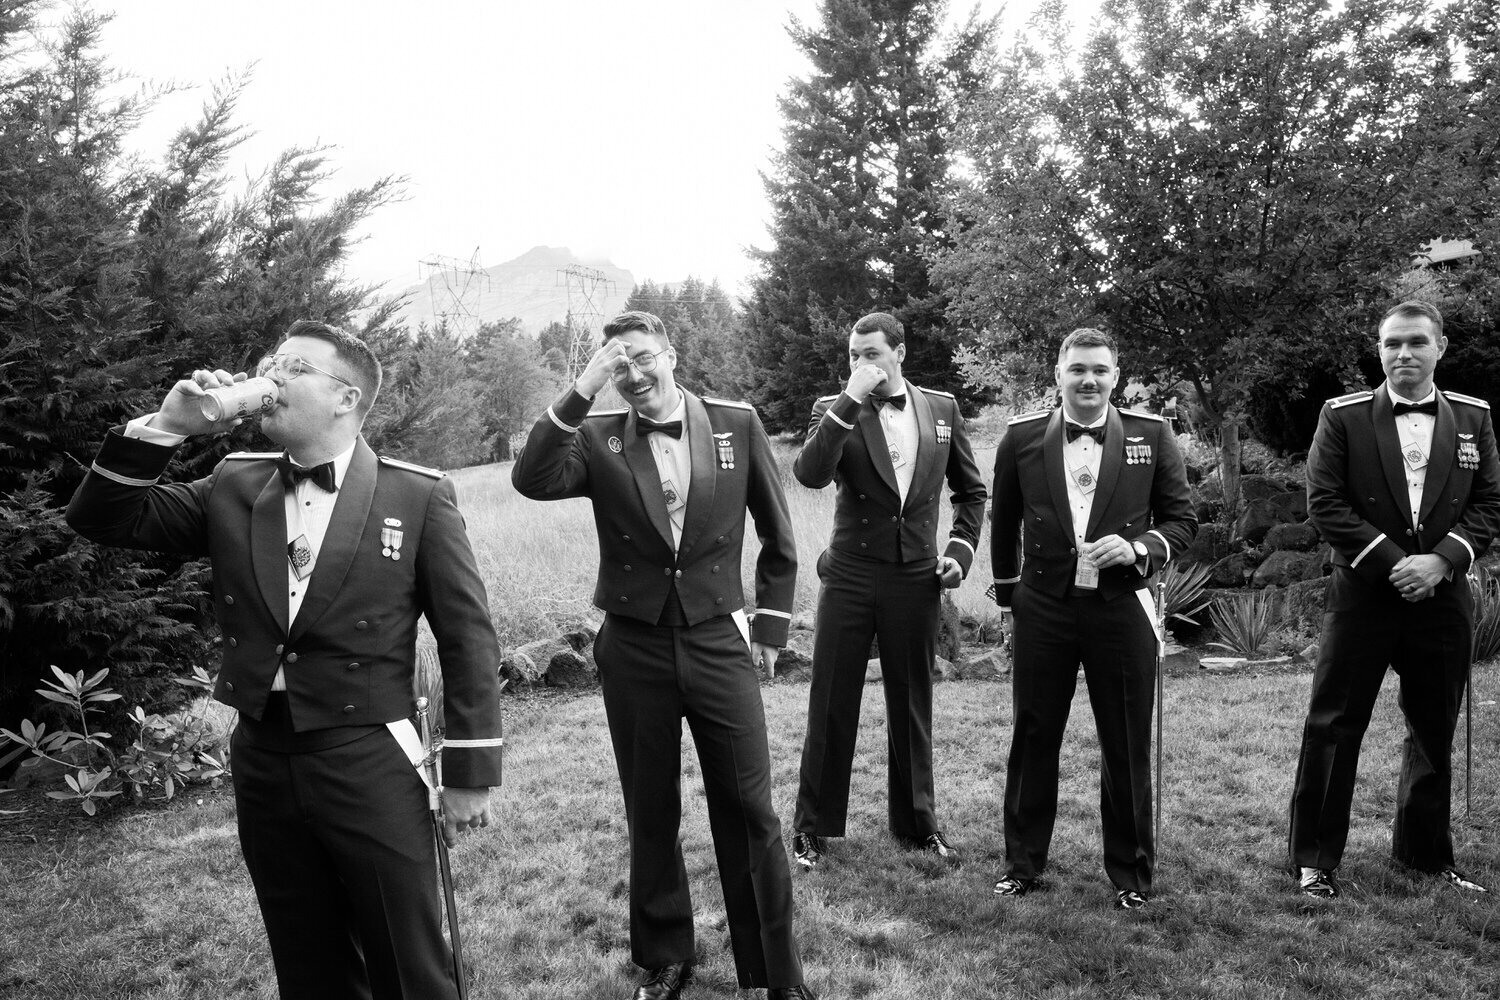 Groomsmen in military dress uniforms  wait for the portraits to conclude